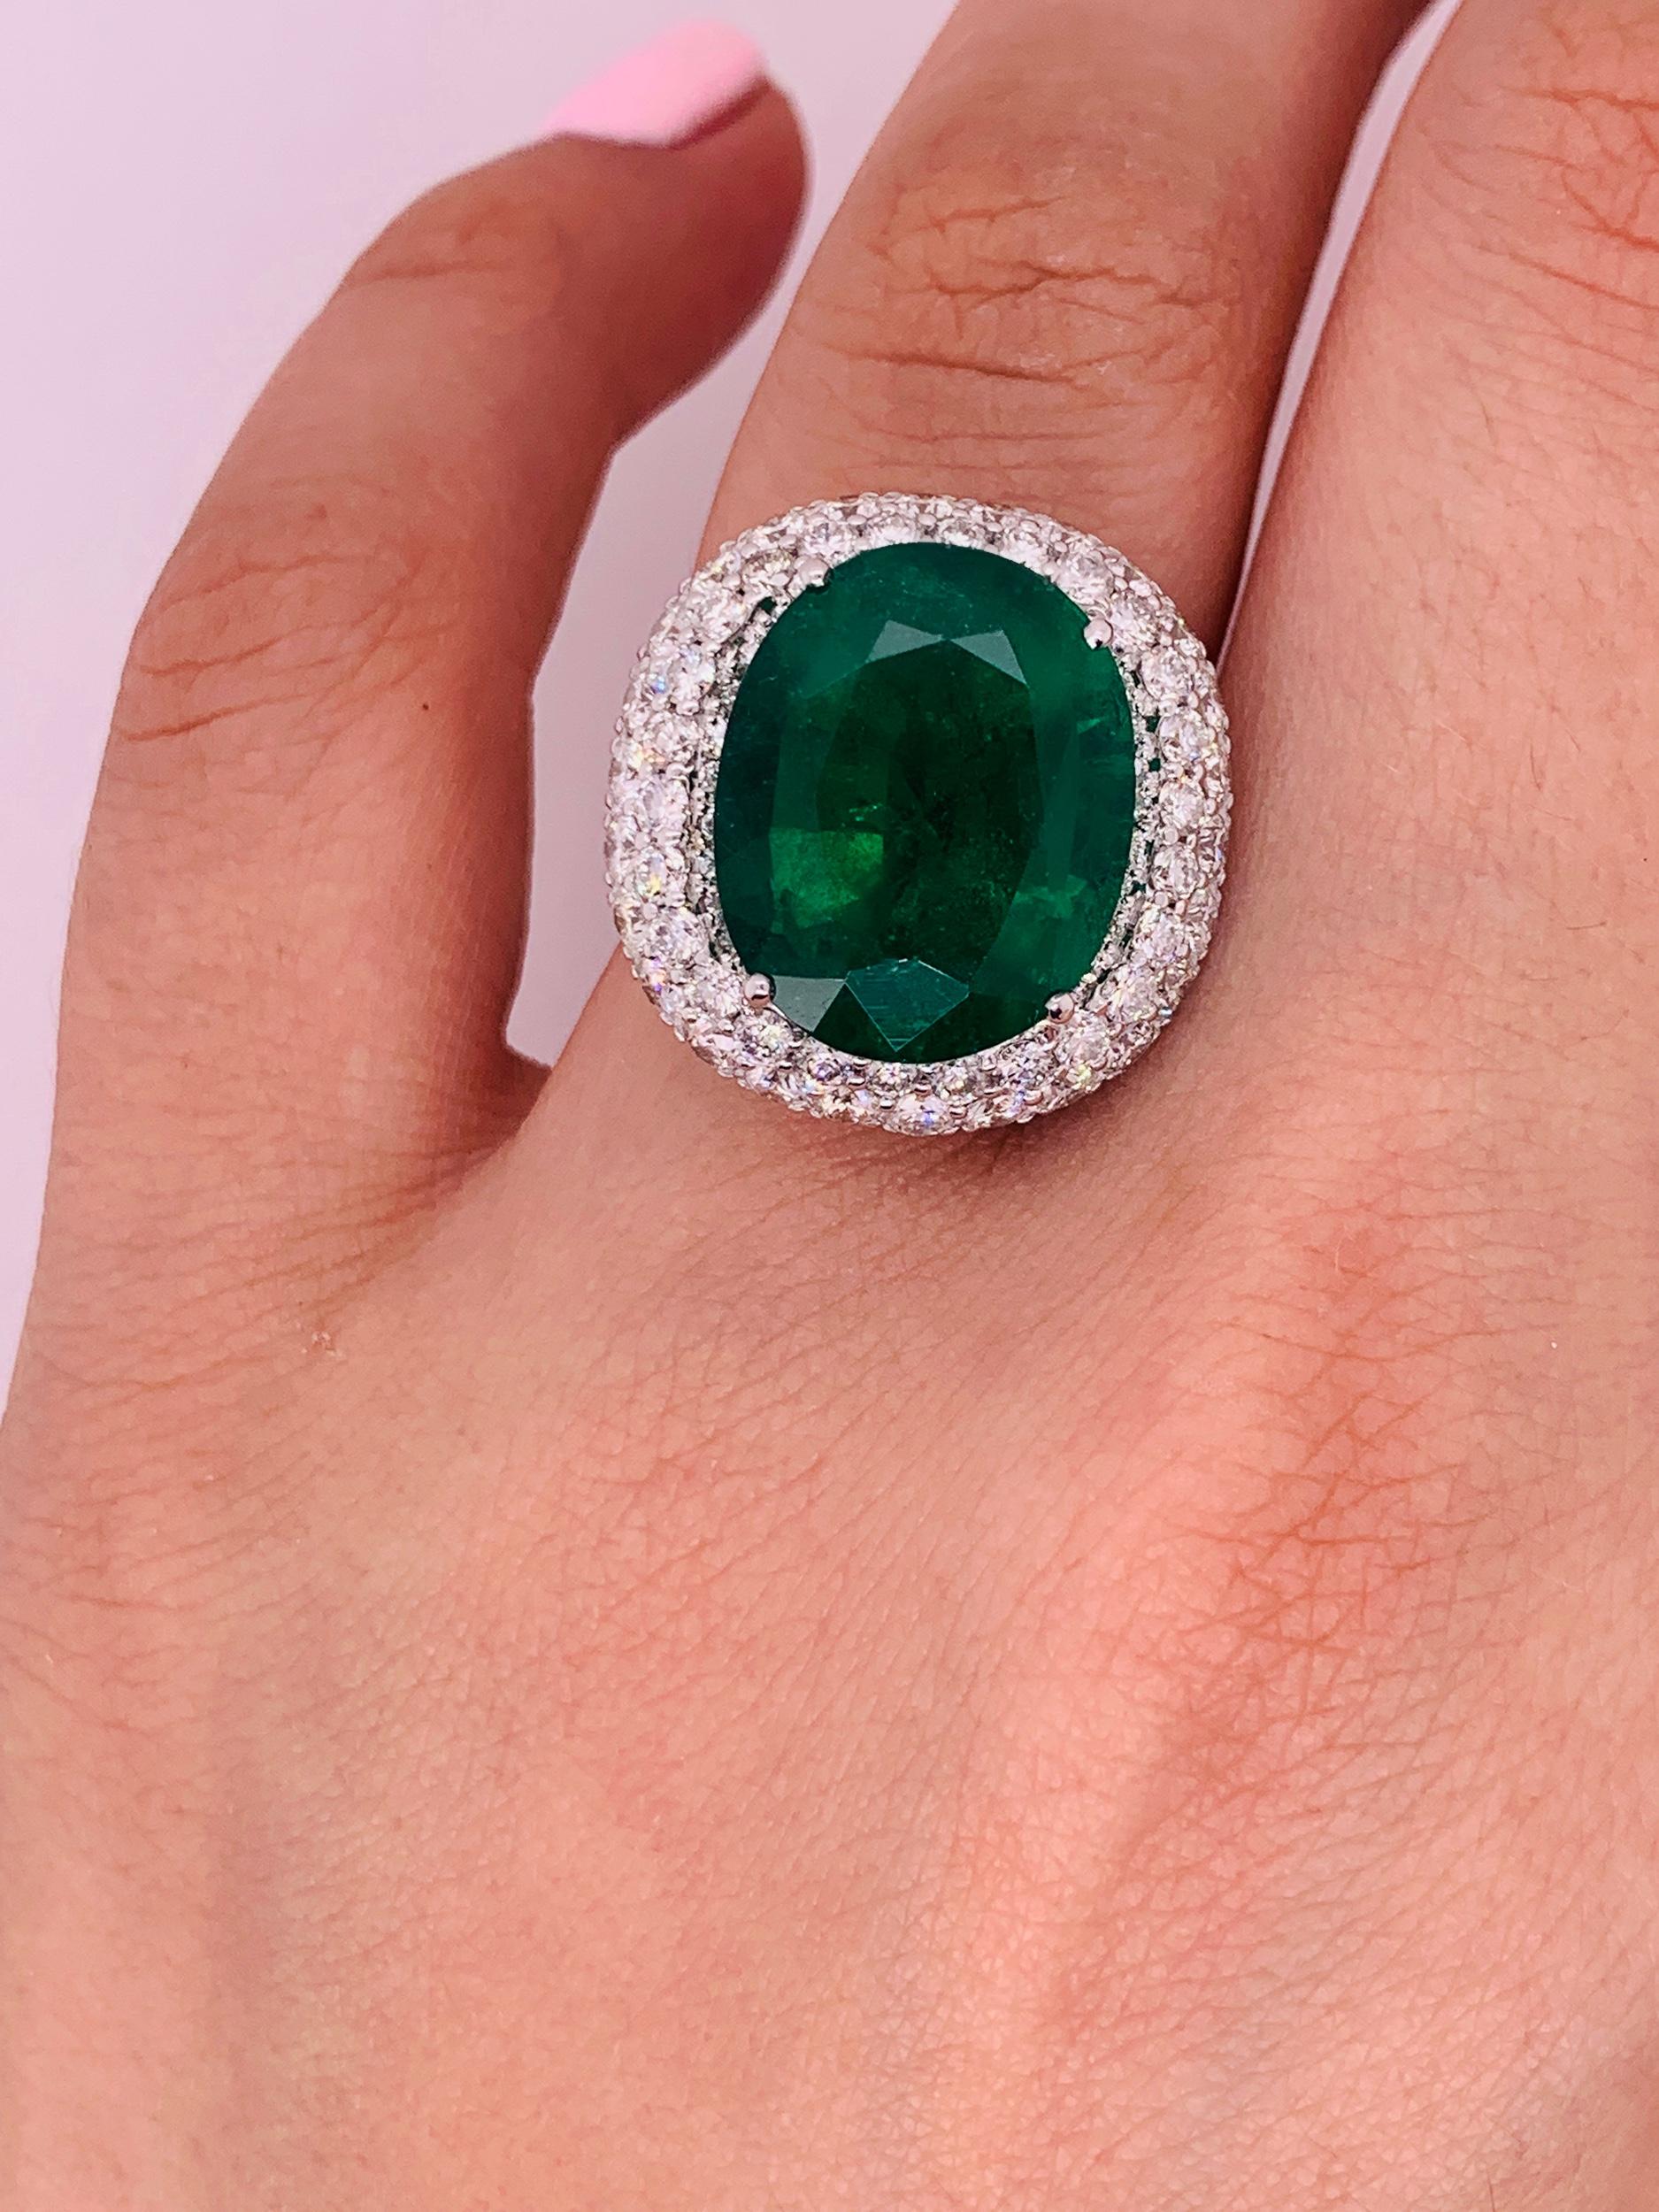 Oval Cut GIA Certified 10.95 Carat Green Emerald Diamond Ring For Sale